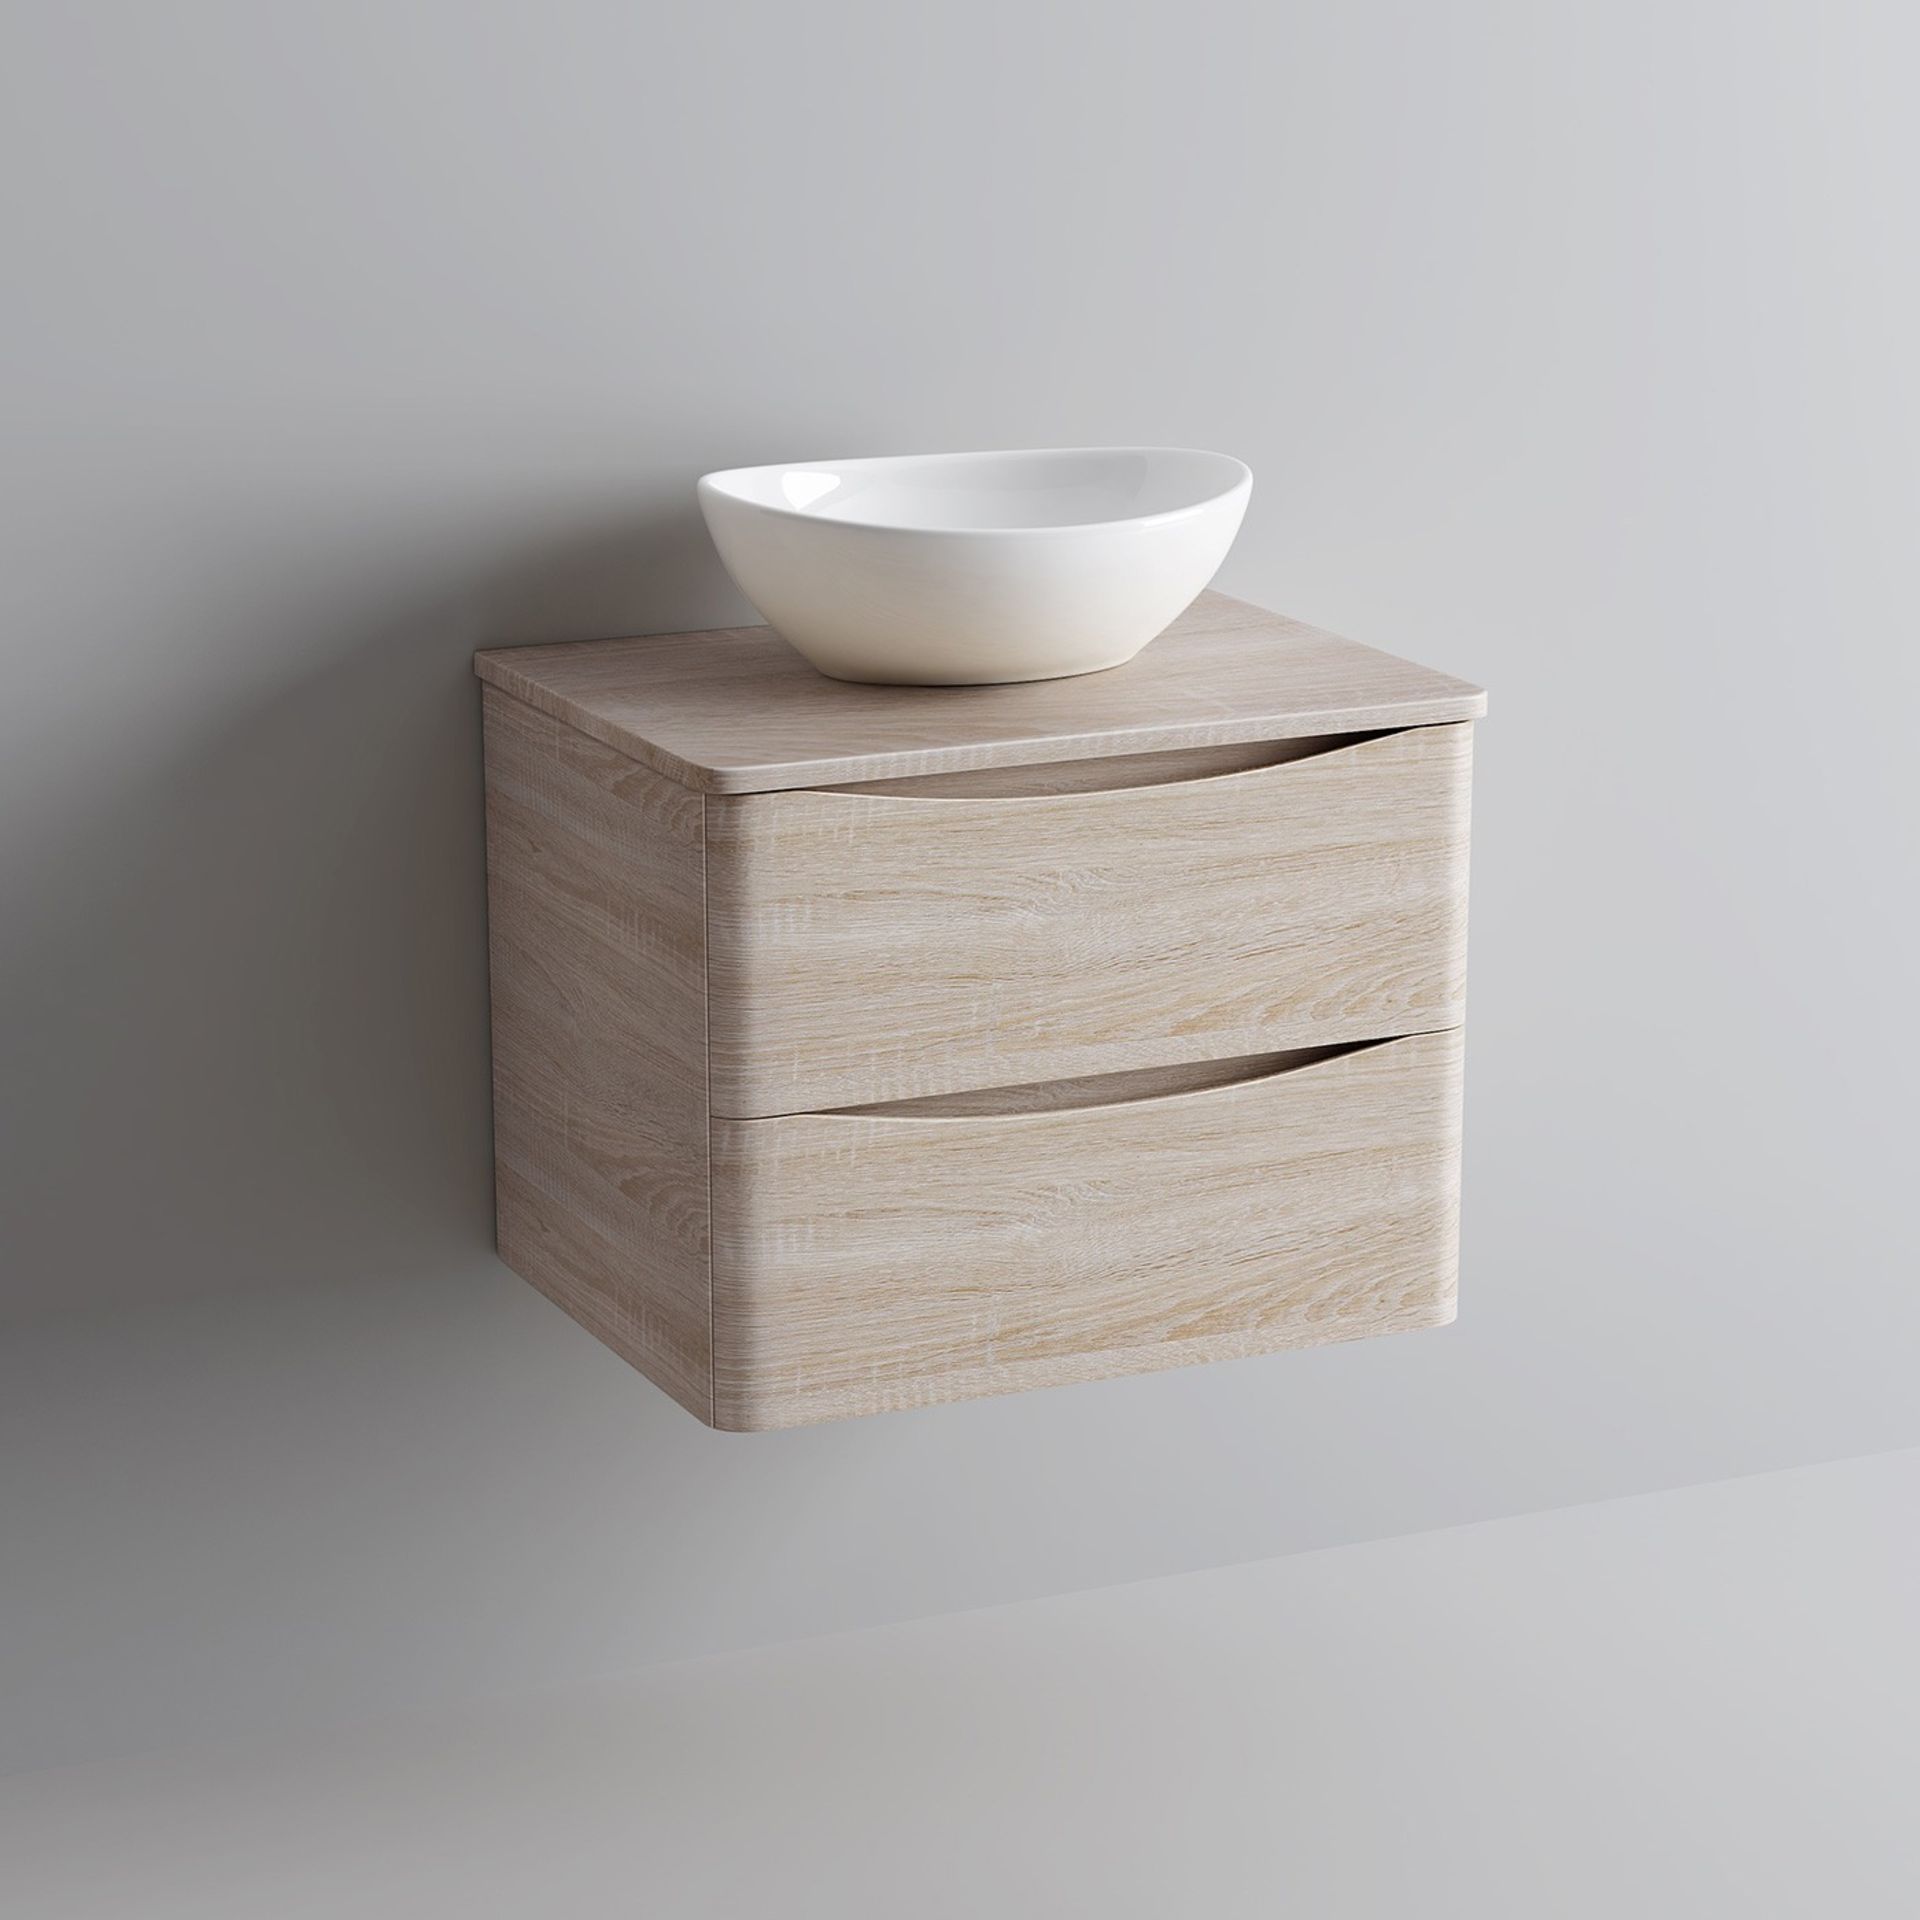 Brand New 600MM AUSTIN II LIGHT OAK EFFECT COUNTERTOP UNIT & BASIN - WALL. RRP £849.99. Includes Pur - Image 2 of 2